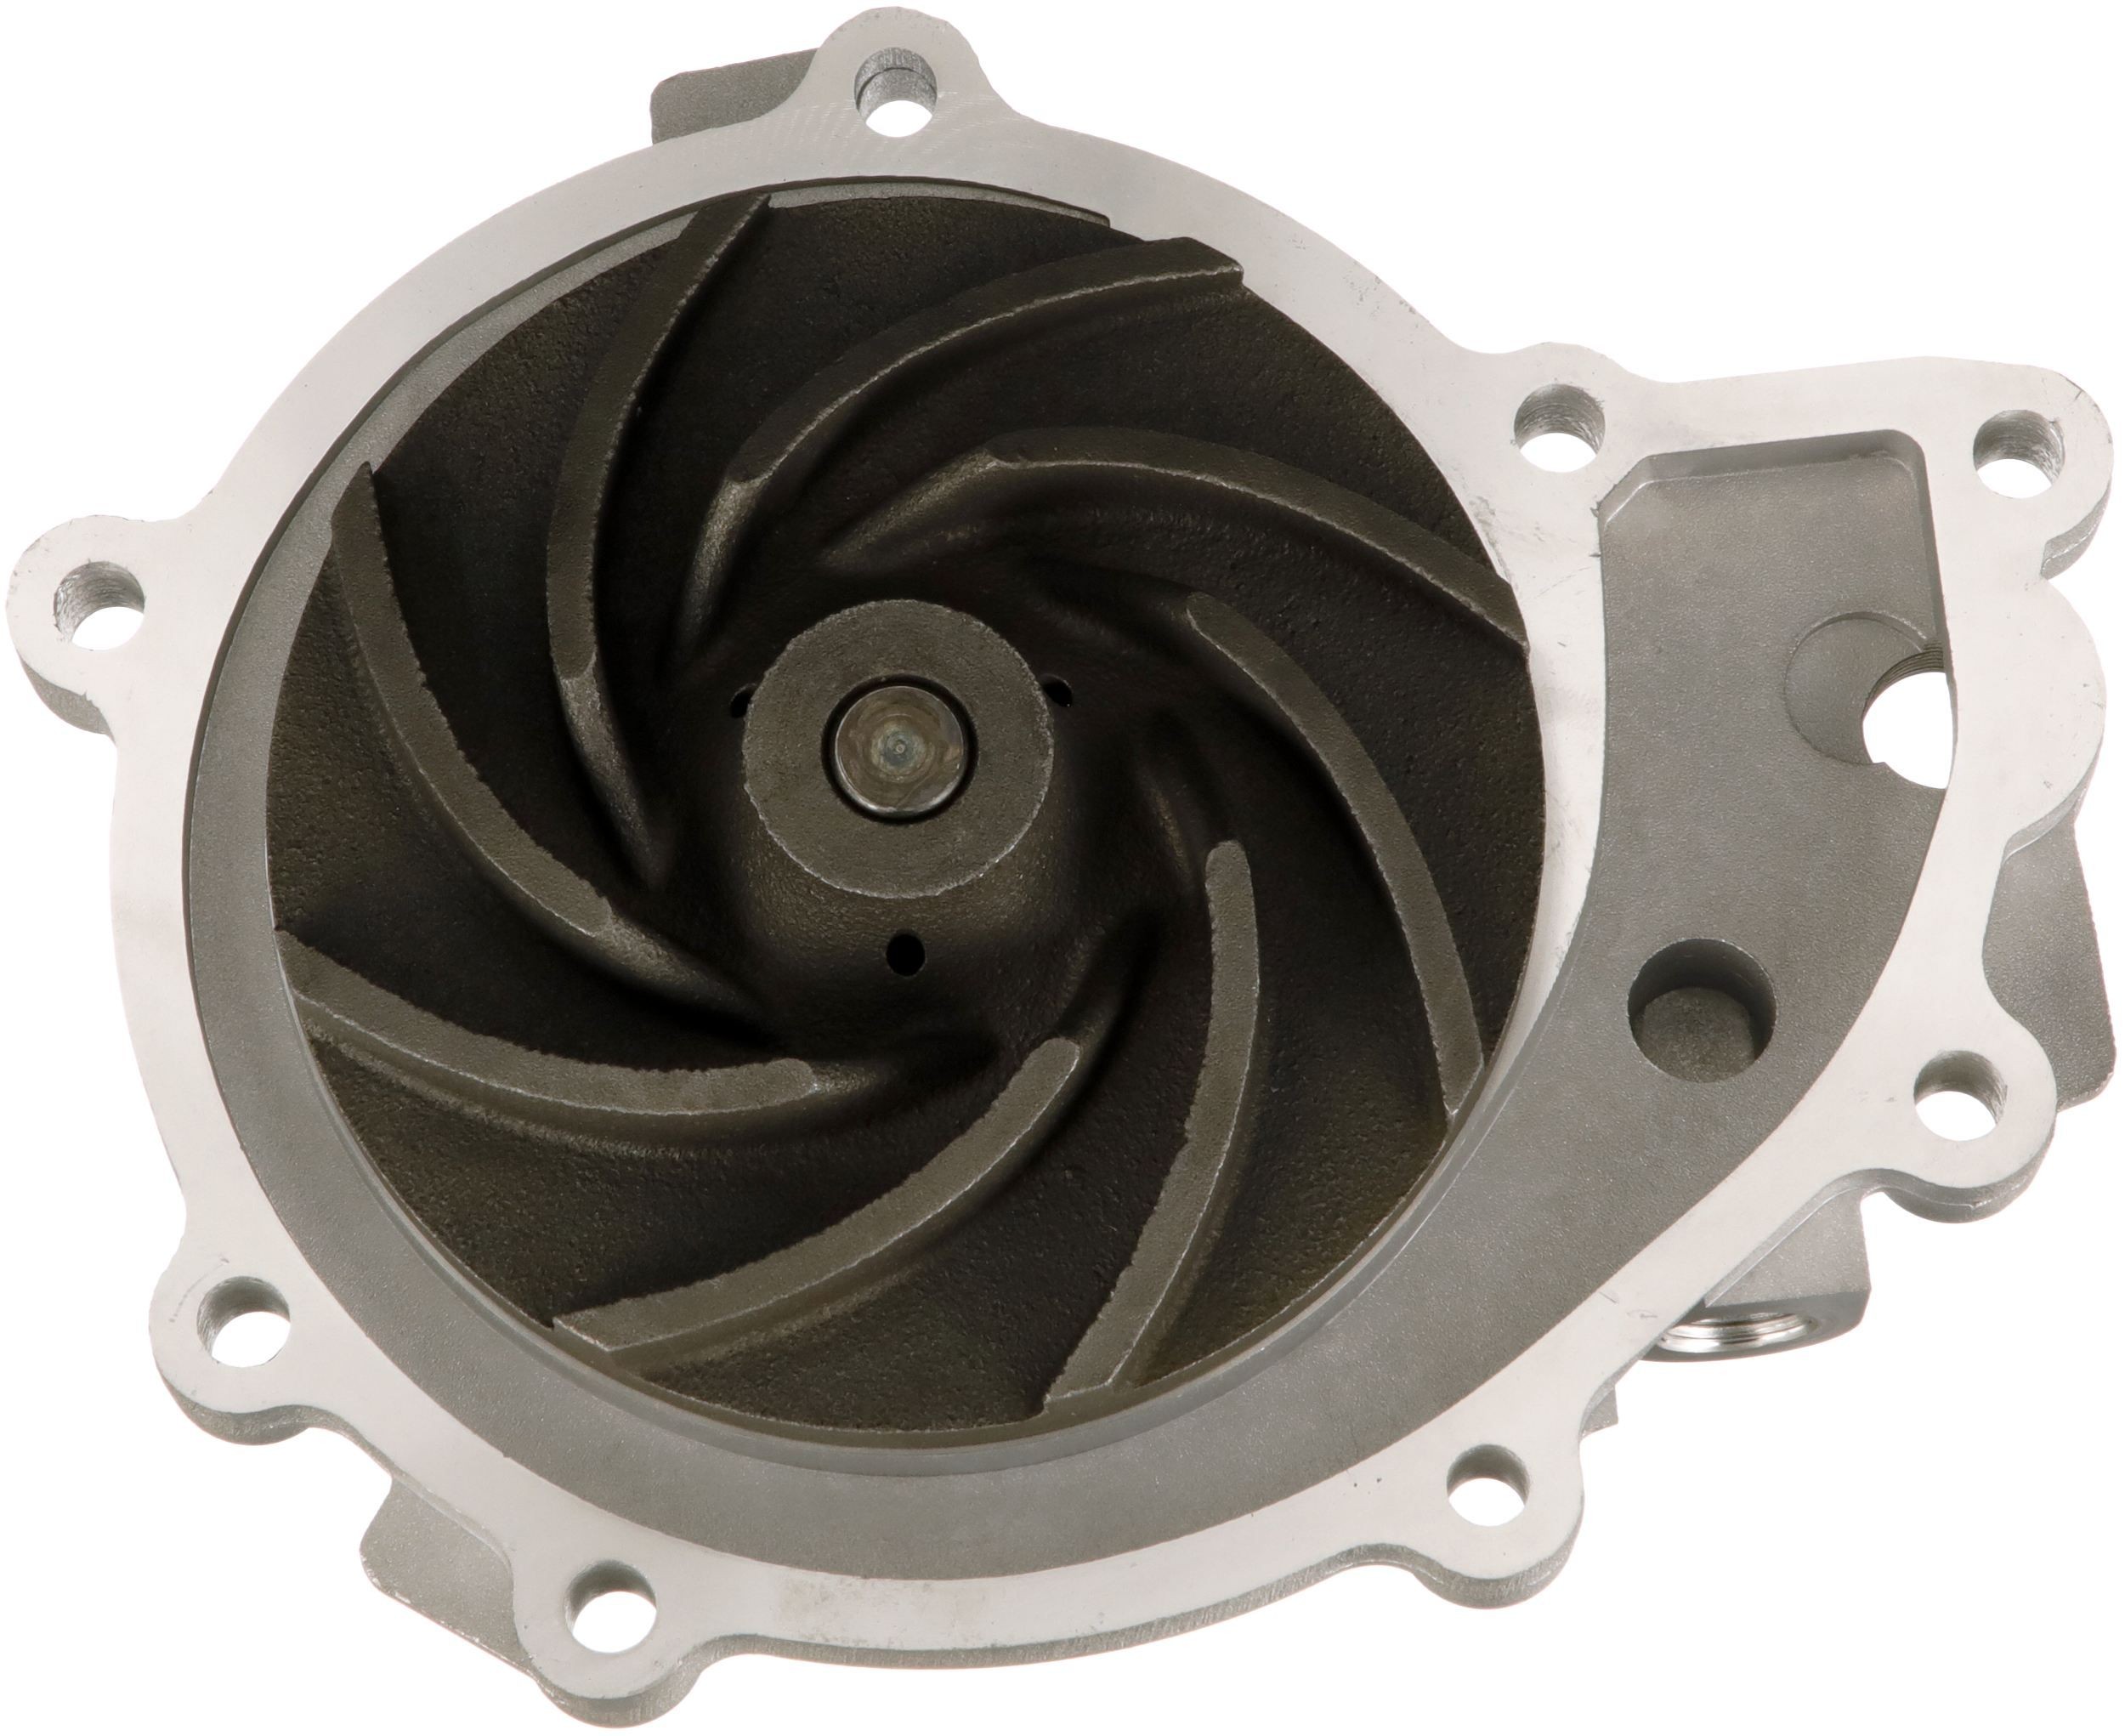 GATES 7702-15072 Water pump Aluminium, without belt pulley, for v-ribbed belt pulley, with gaskets/seals